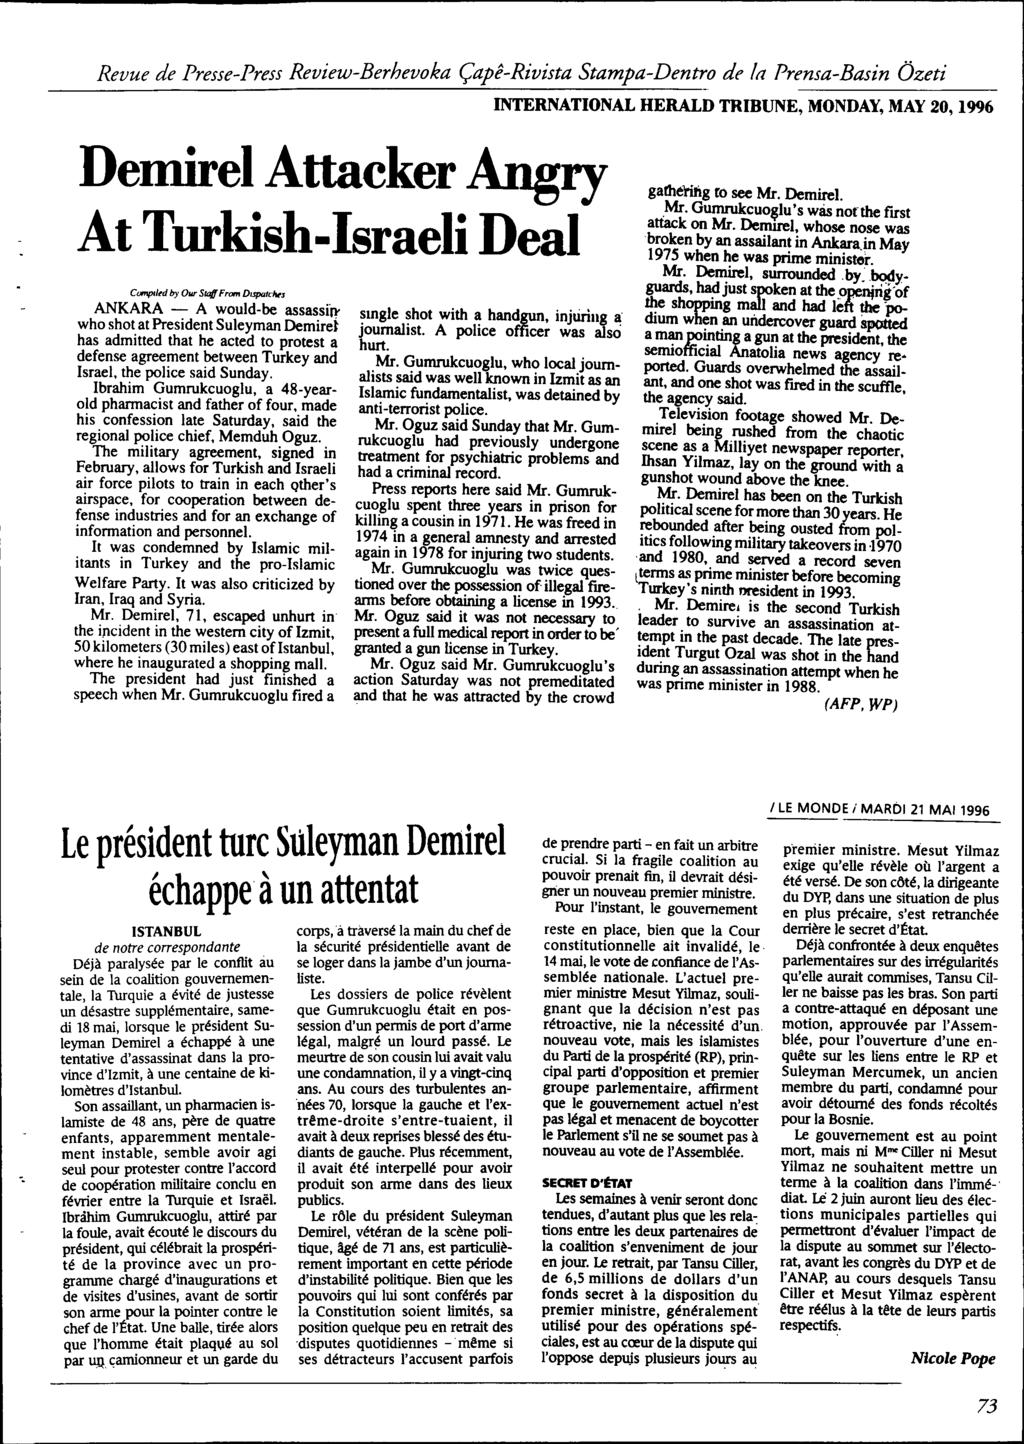 Demirel Attacker Angry At Turkish -Israeli Deal CompIl.d by Ow Stoff From D,spa/,.